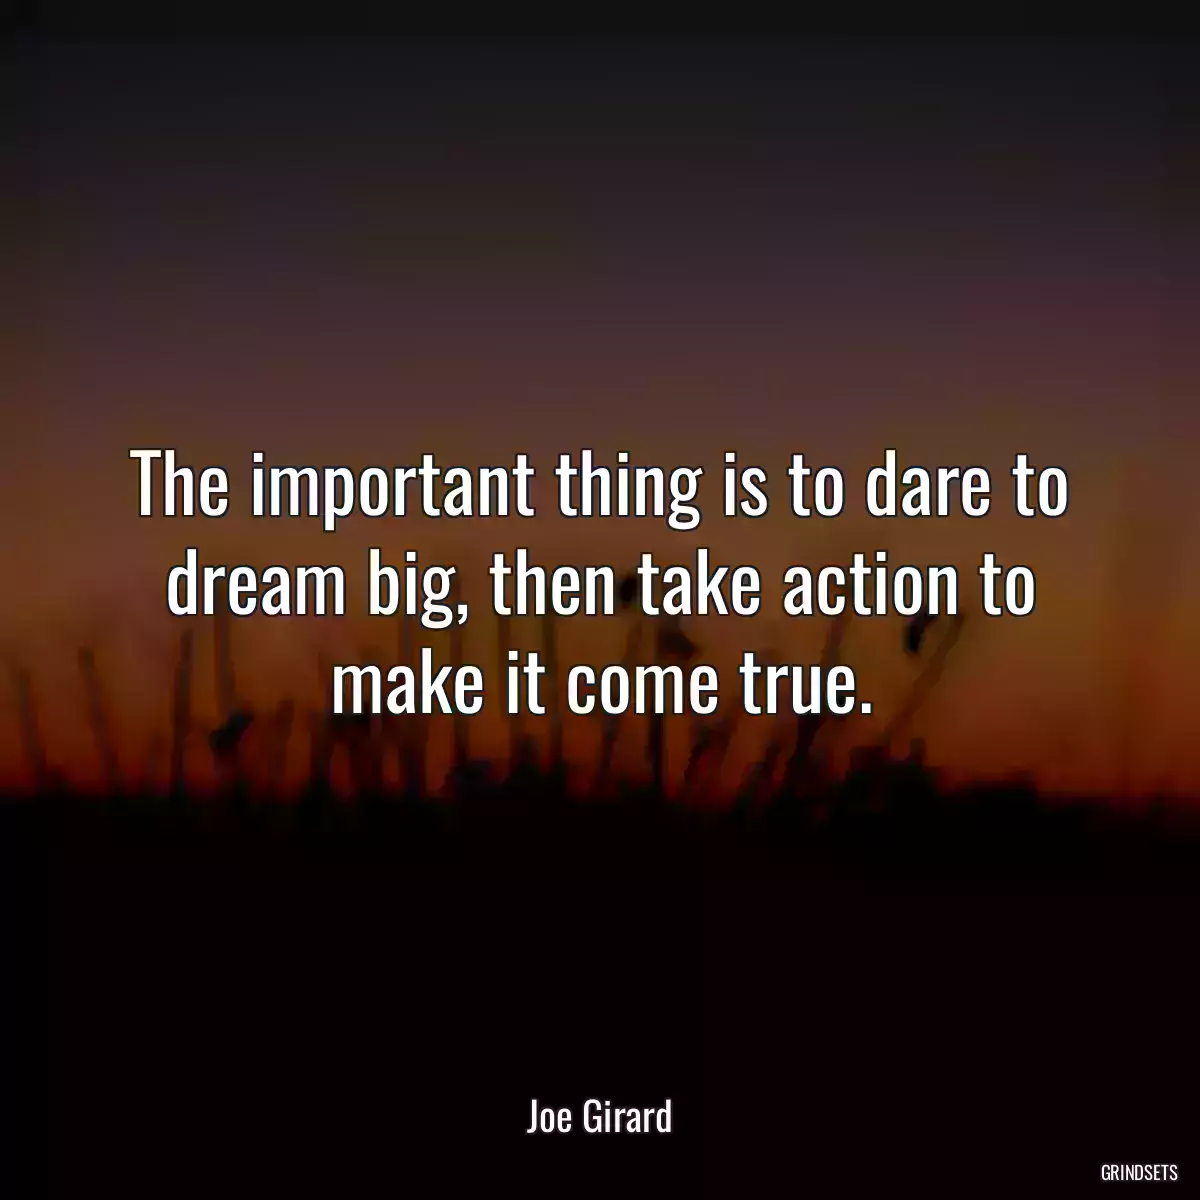 The important thing is to dare to dream big, then take action to make it come true.